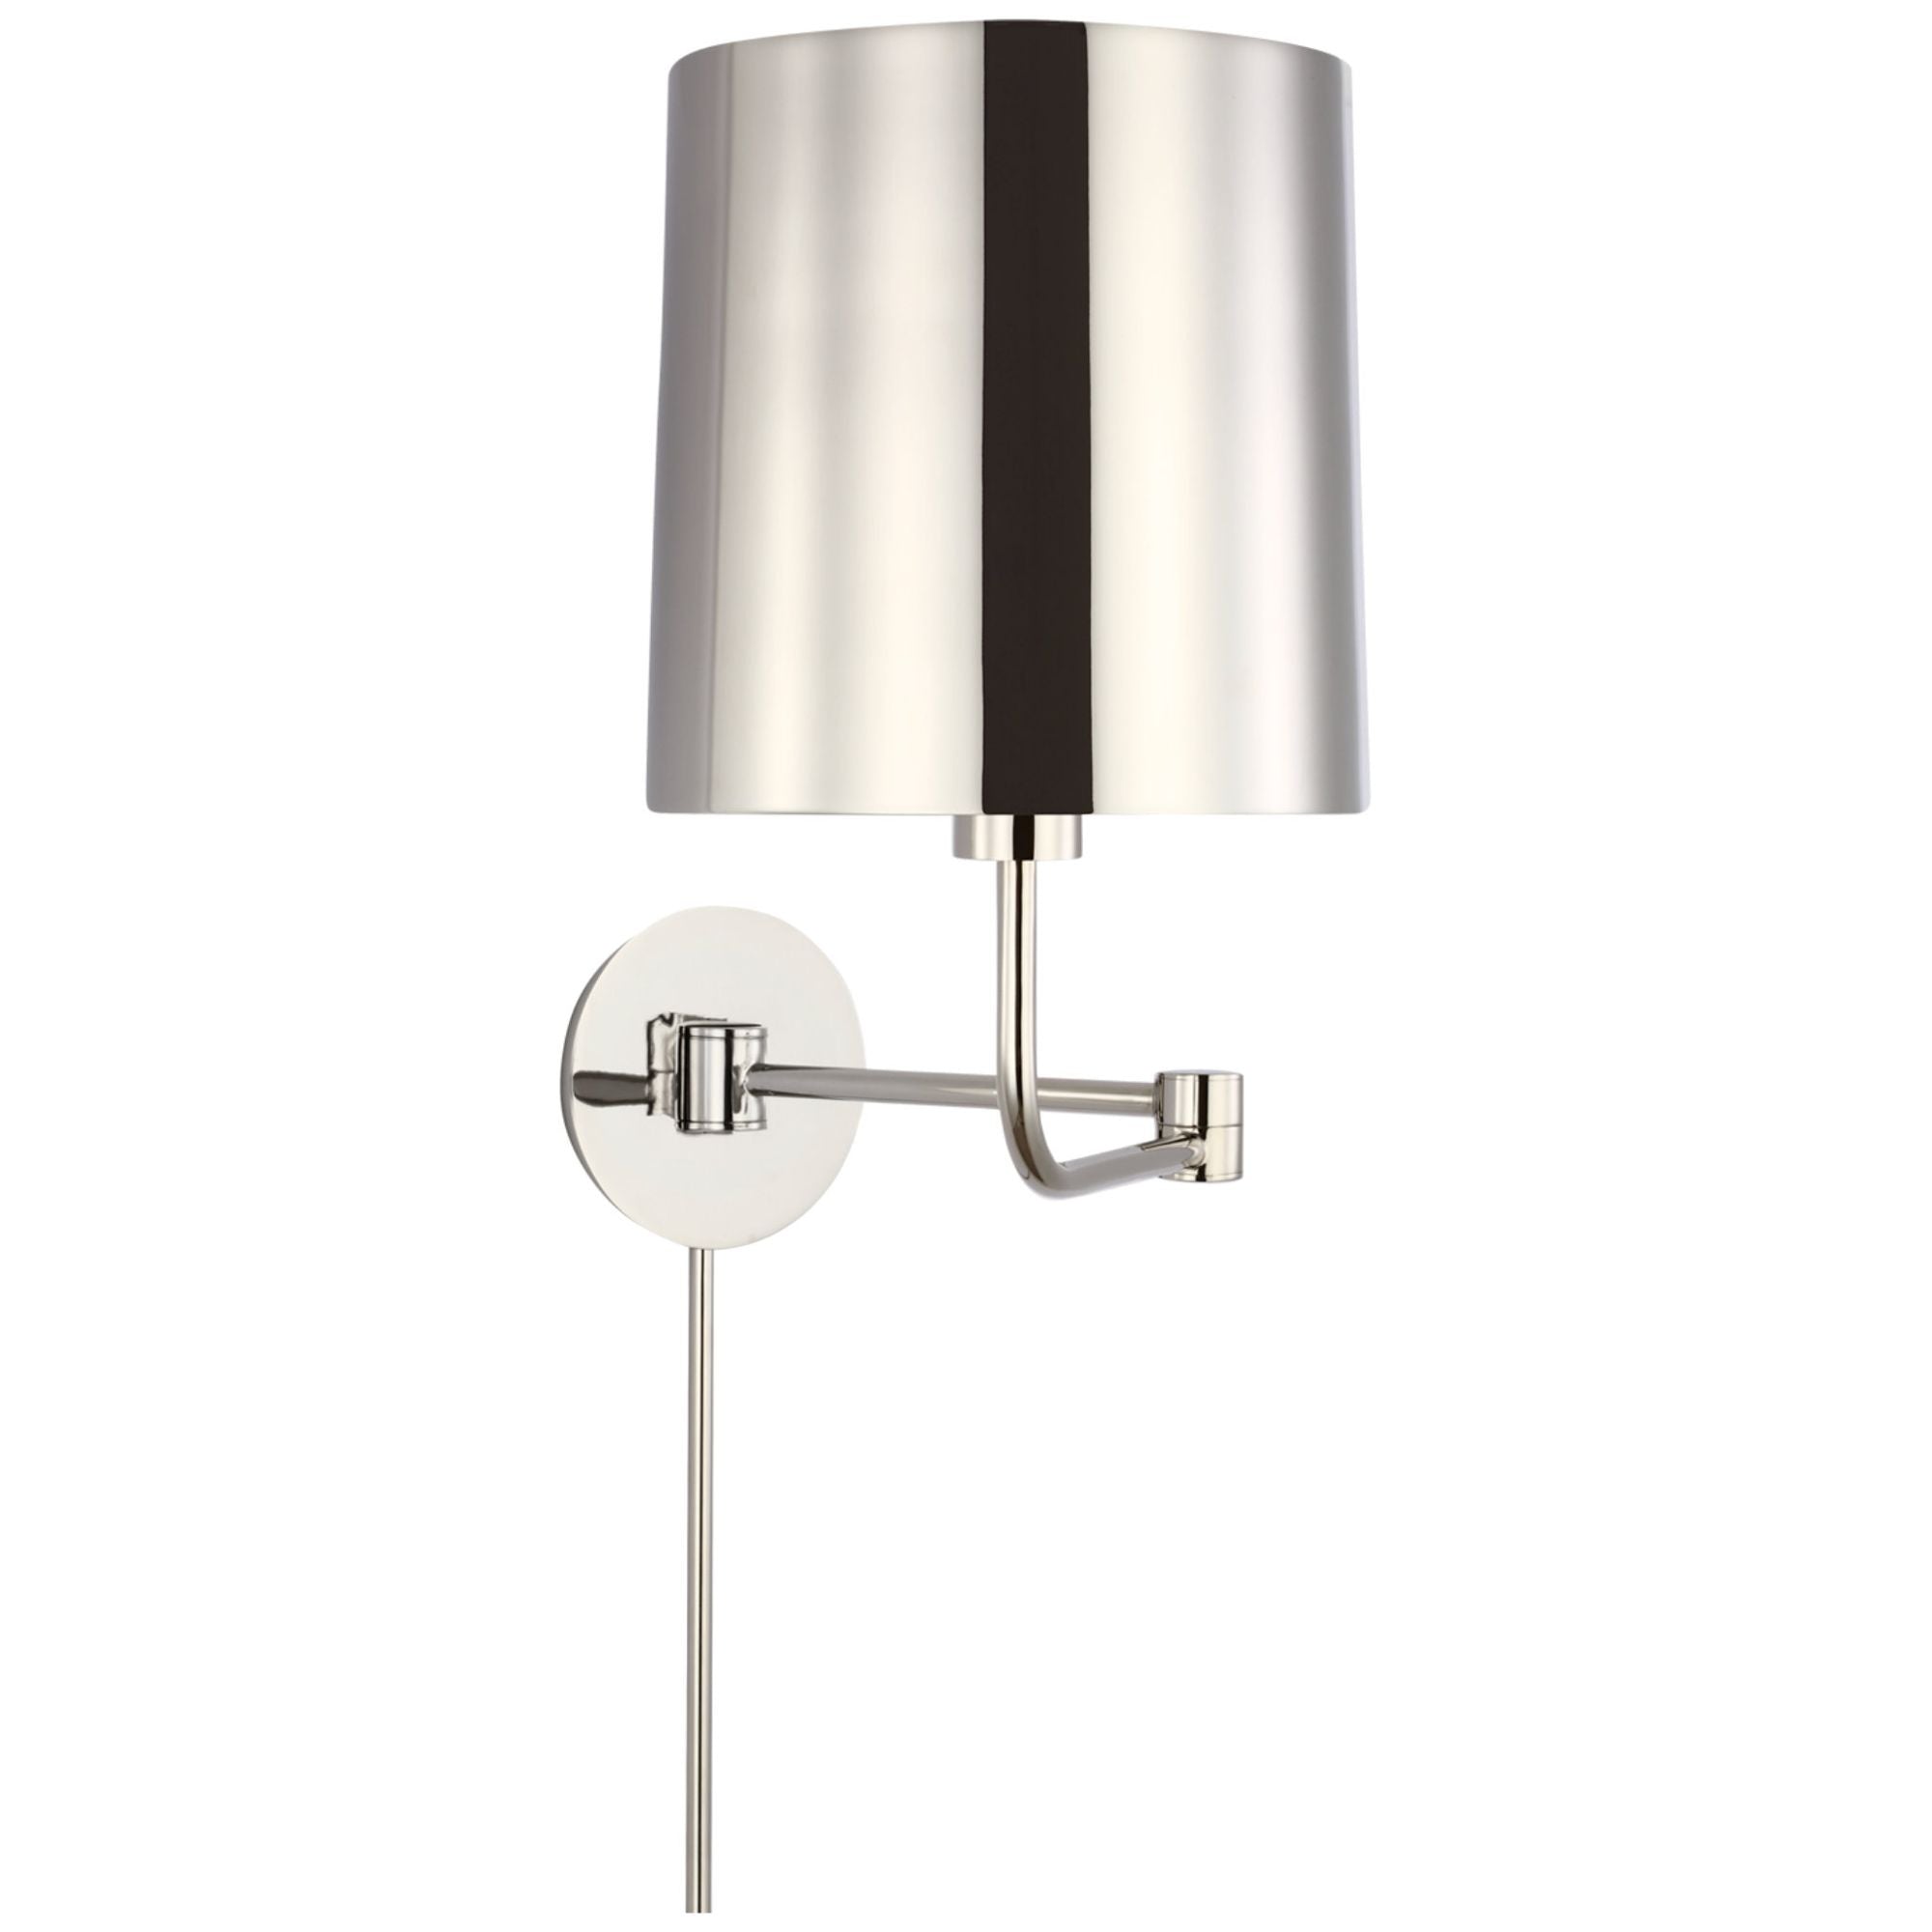 Barbara Barry Go Lightly Swing Arm Wall Light in Polished Nickel with Polished Nickel Shade